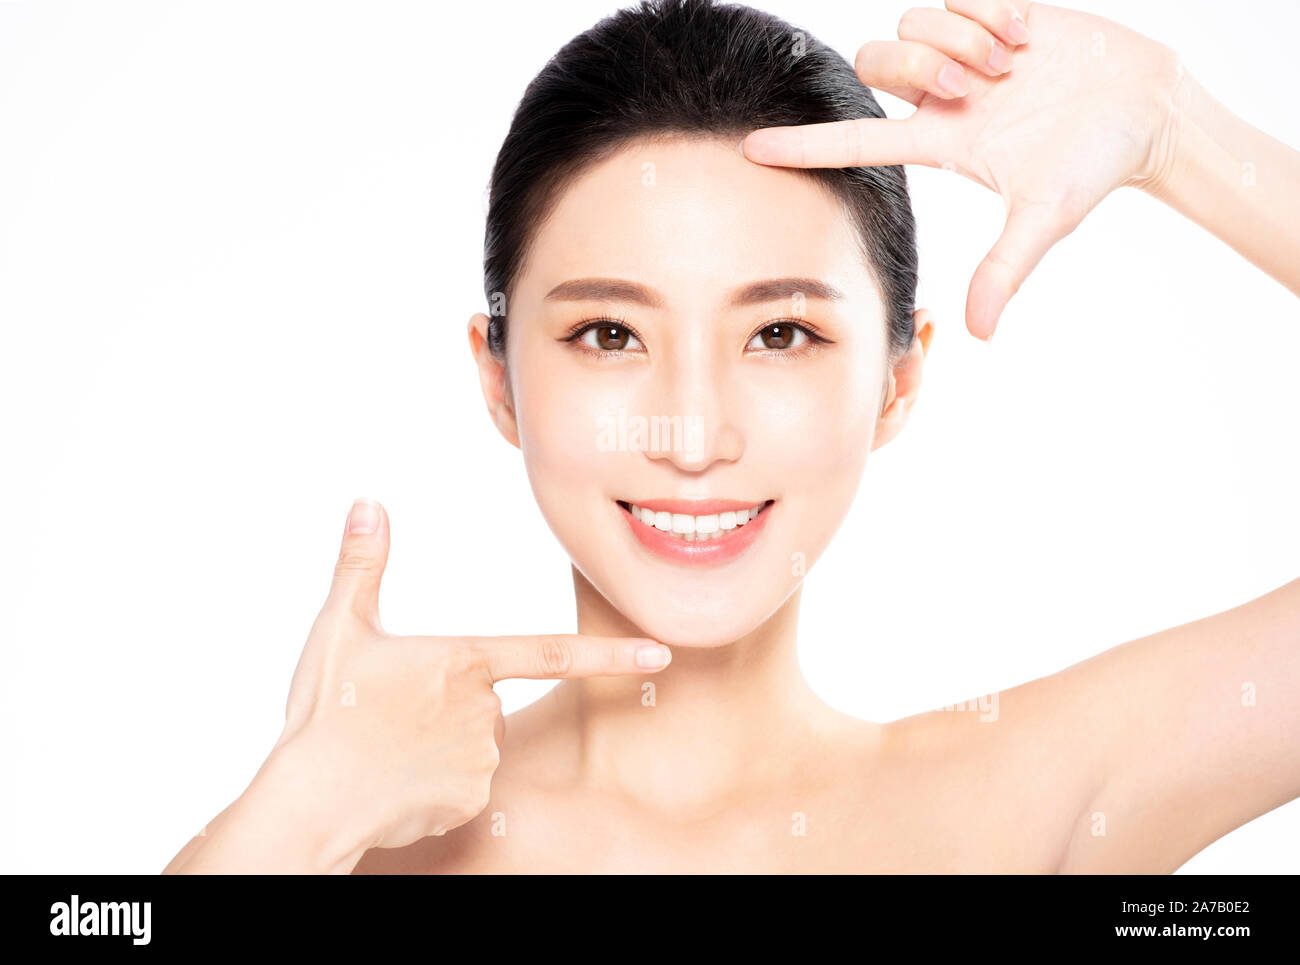 Closeup of Smiling beauty  Making Frame Gesture Stock Photo